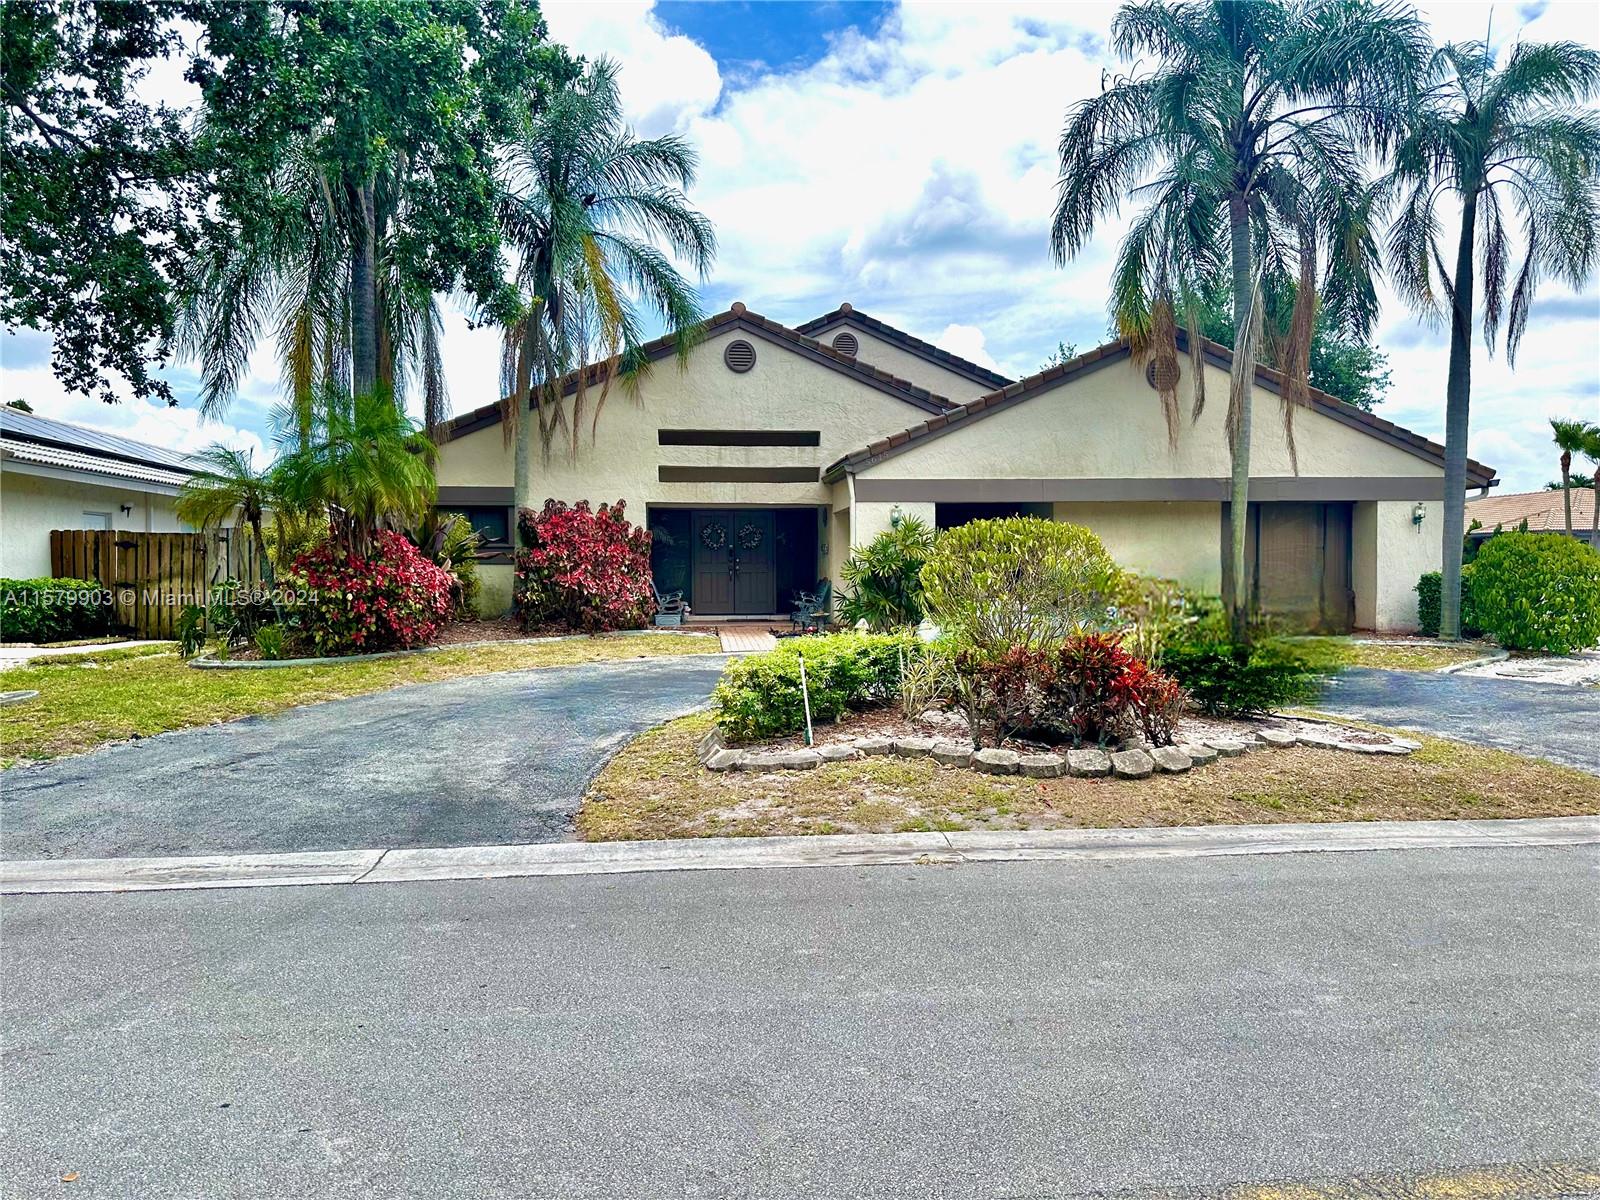 Property for Sale at 5615 Nw 64th Ln Ln, Coral Springs, Broward County, Florida - Bedrooms: 4 
Bathrooms: 3  - $690,000